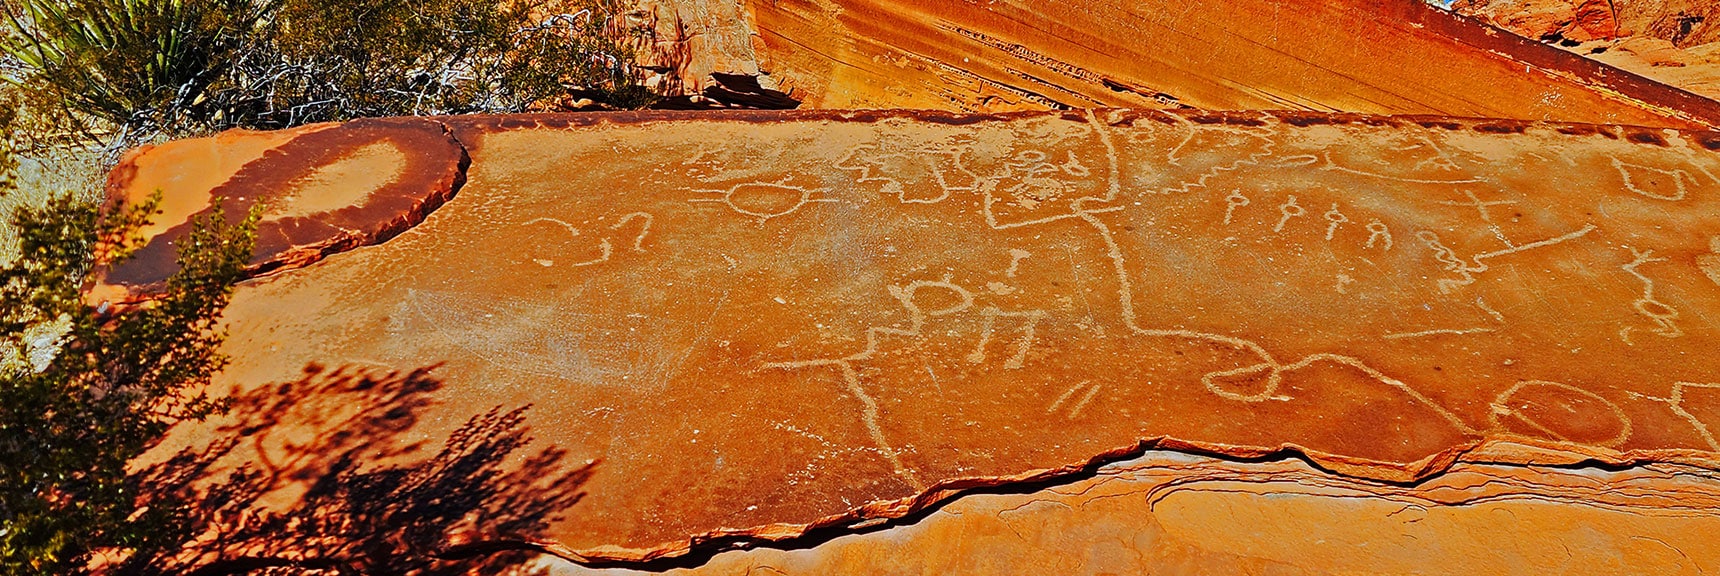 Enigmatic Drawings Created by Ancient Southern Paiutes | 3 Basin Circuit | Calico Basin, Brownstone Basin, Red Rock Canyon, Nevada